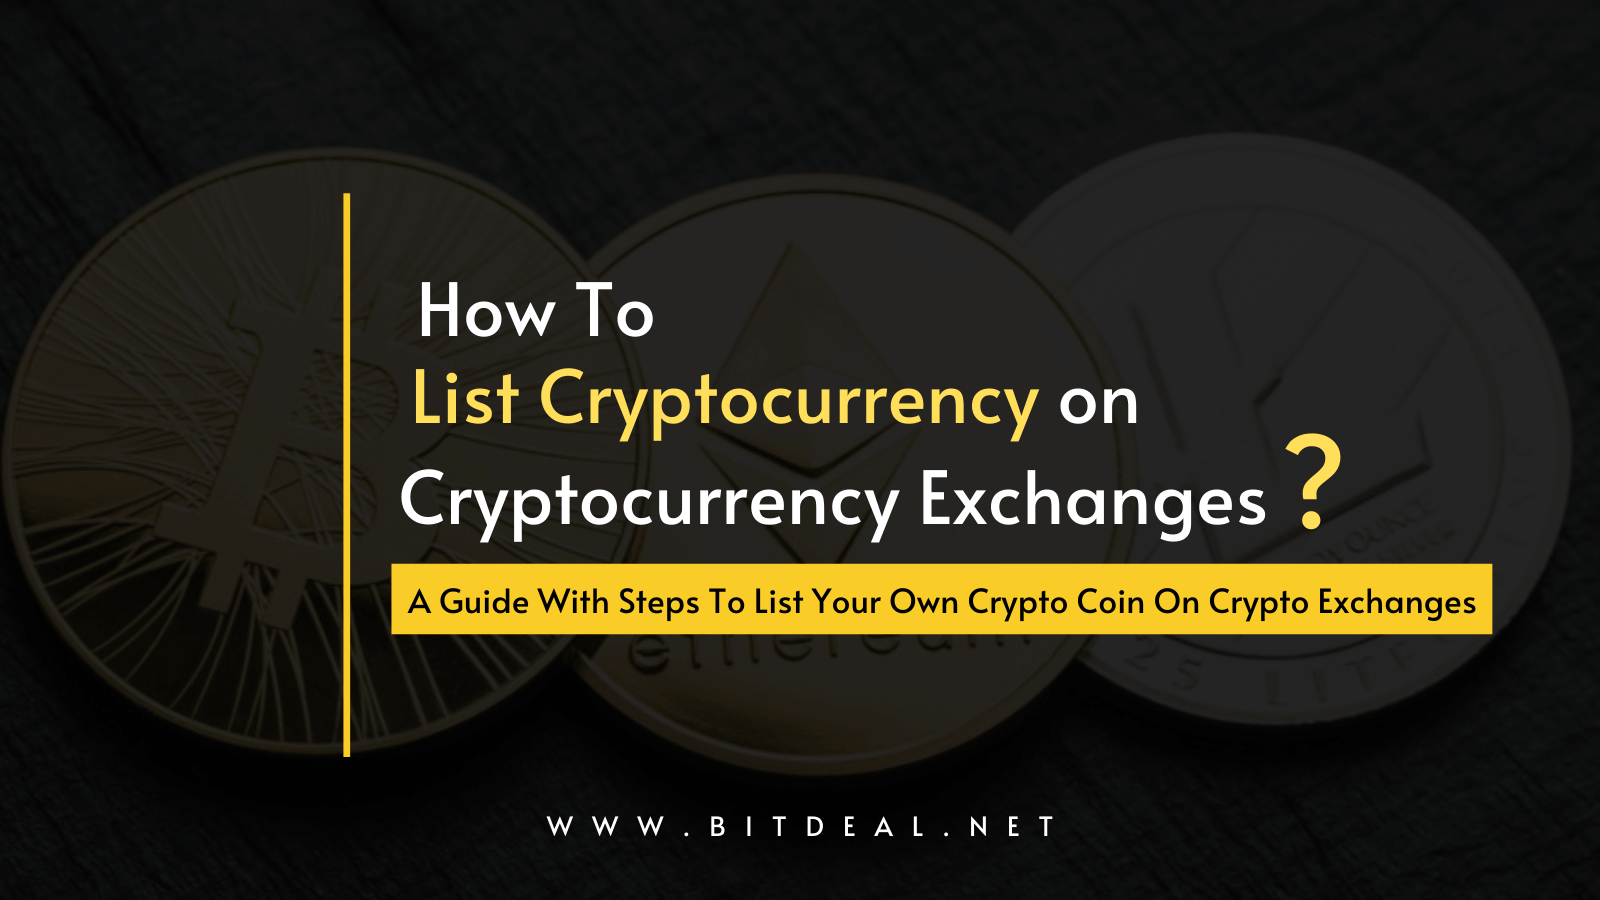 Steps To Build Your Crypto Coin On Exchange Platforms